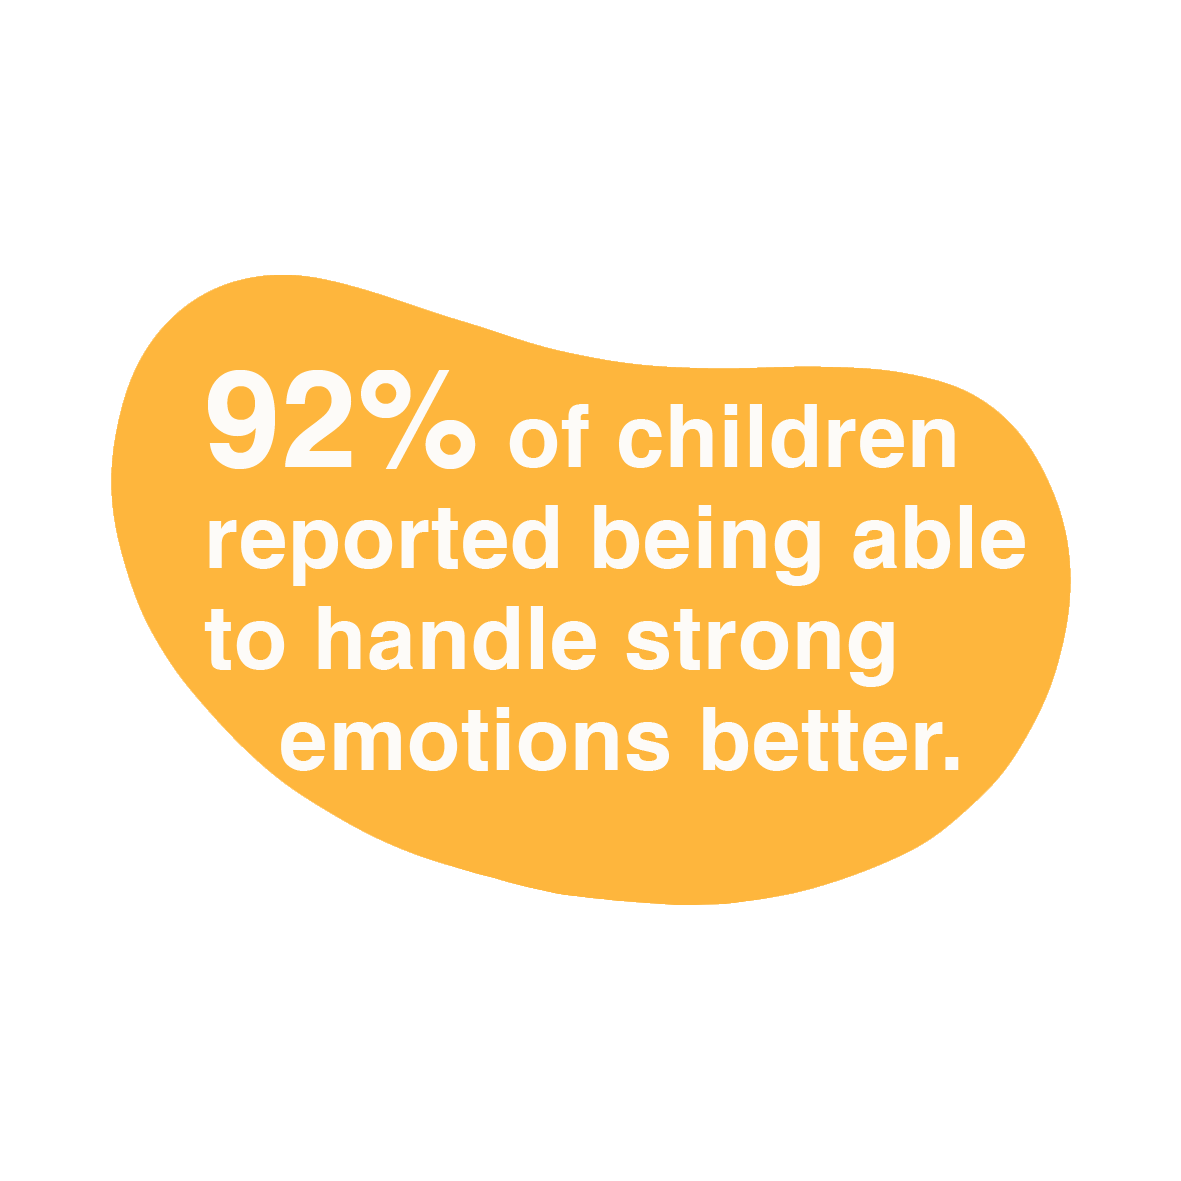 92% of children reported being able to handle strong emotions better.